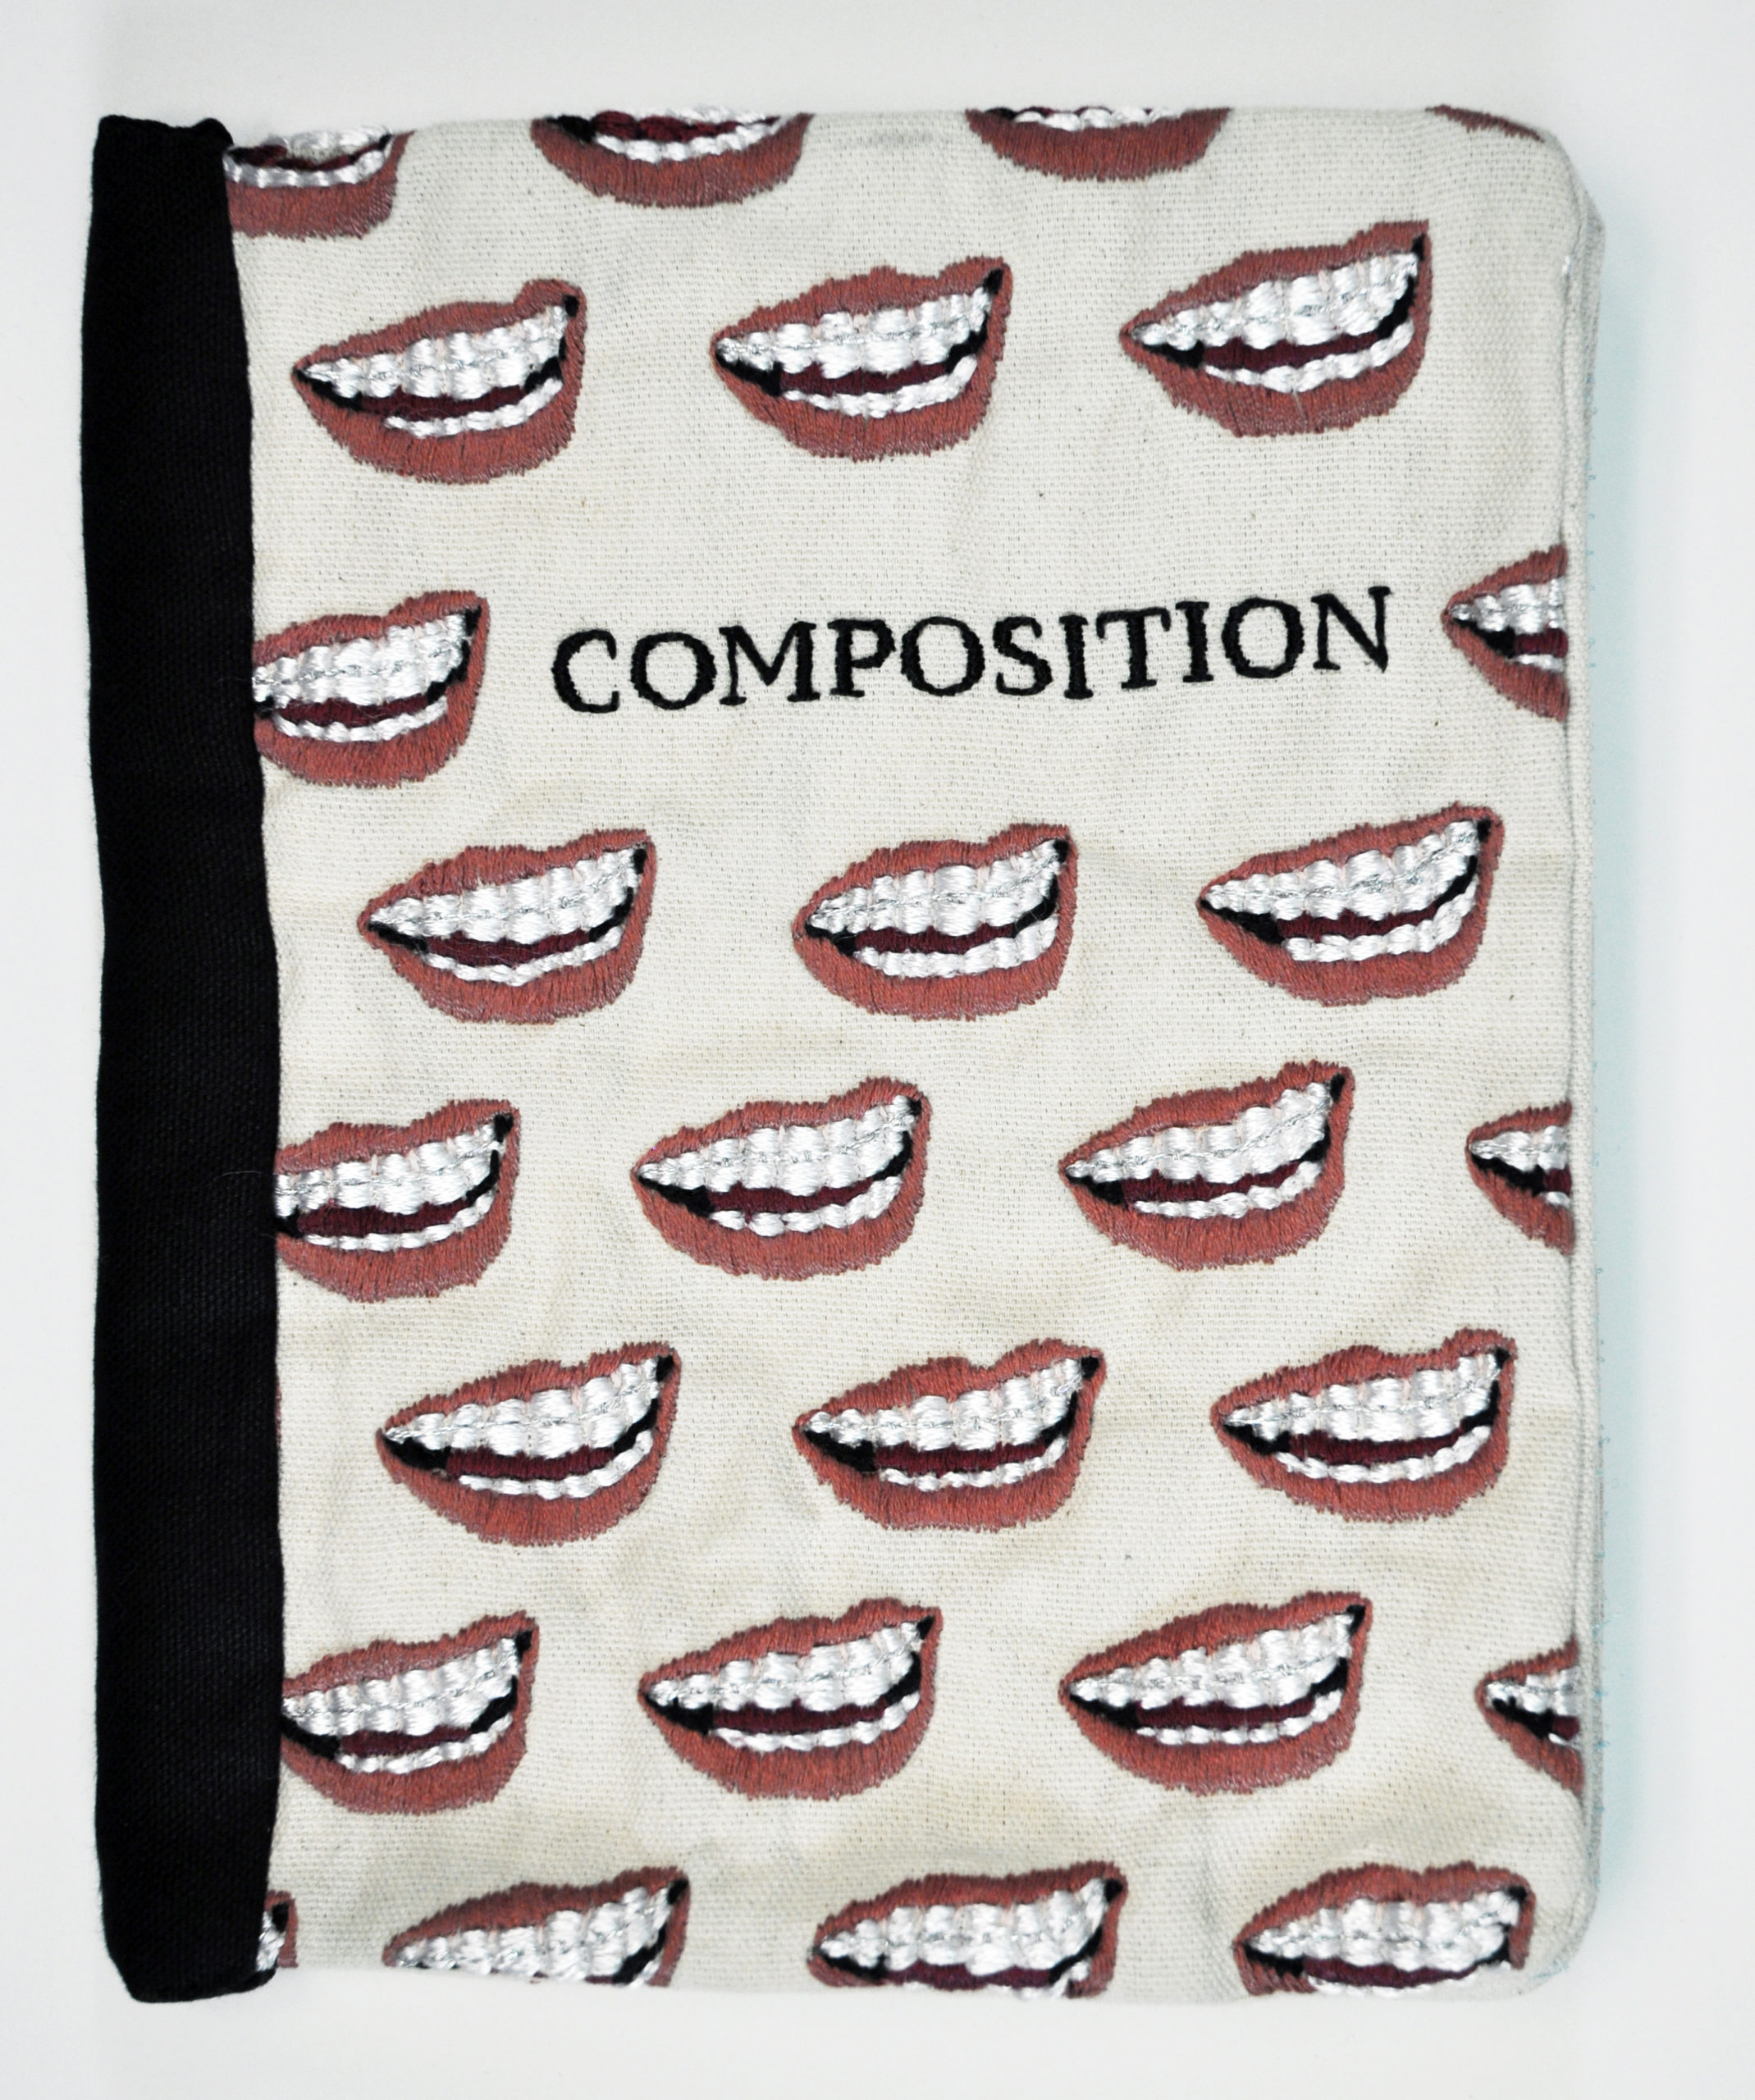 Embroidered composition notebook by Candace Hicks. There are open grimacing mouths embroidered across the cover.